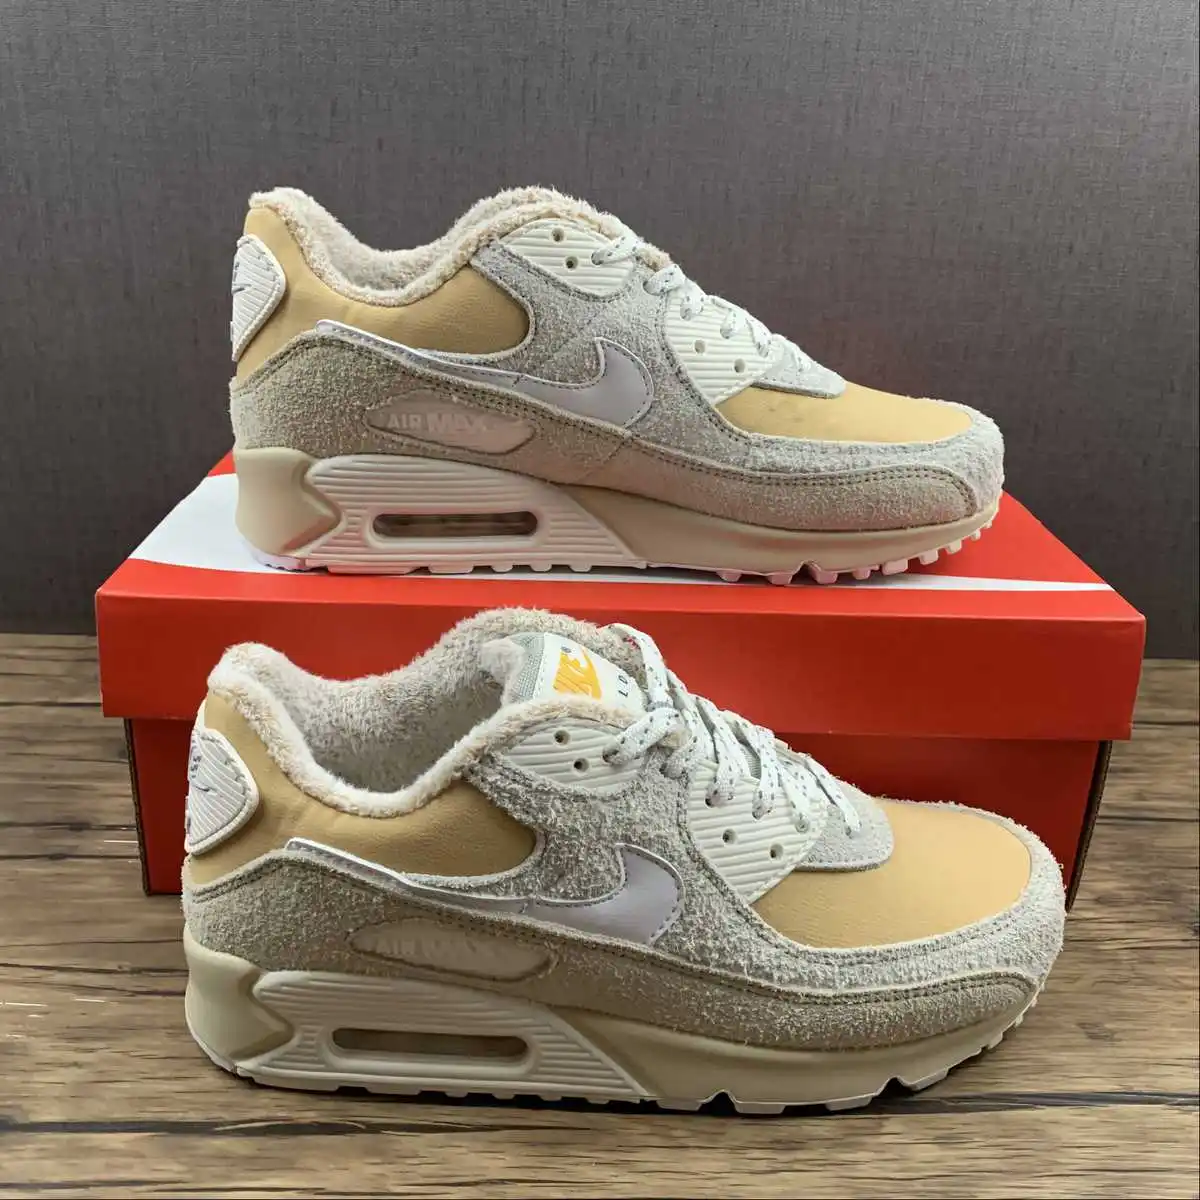 

2021 New design Hotsale Nike Air Max 90 Prm Causal shoes Men's Fashion walking style Outdoor Sports Running Tenis Nike shoes